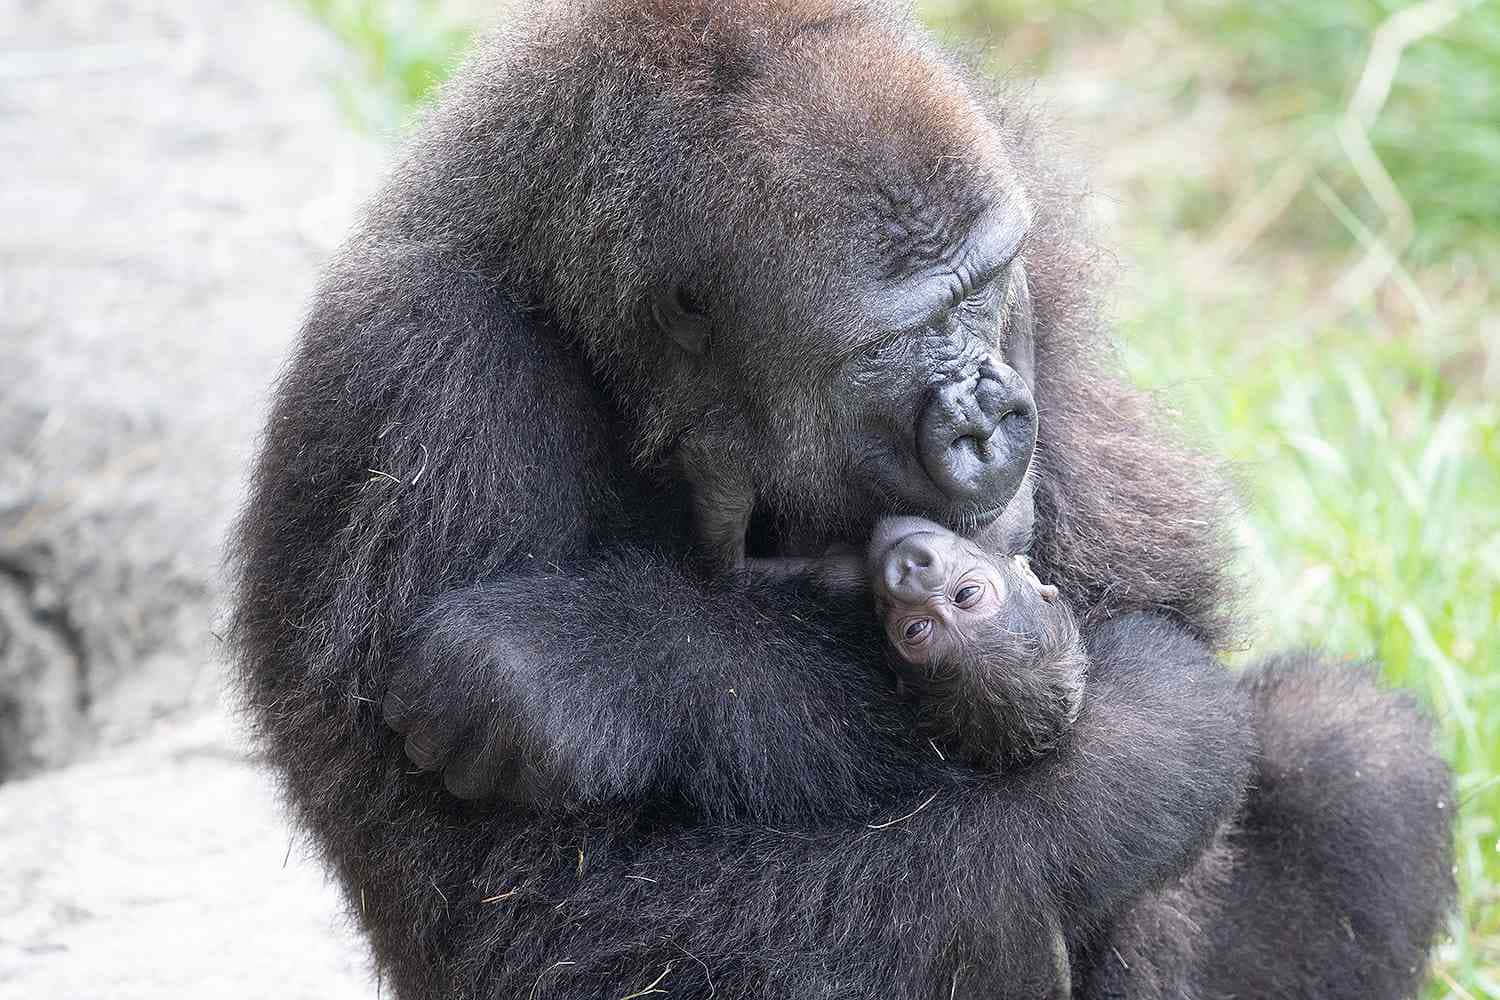 A close-up of a west lowland gorilla inspecting something interesting